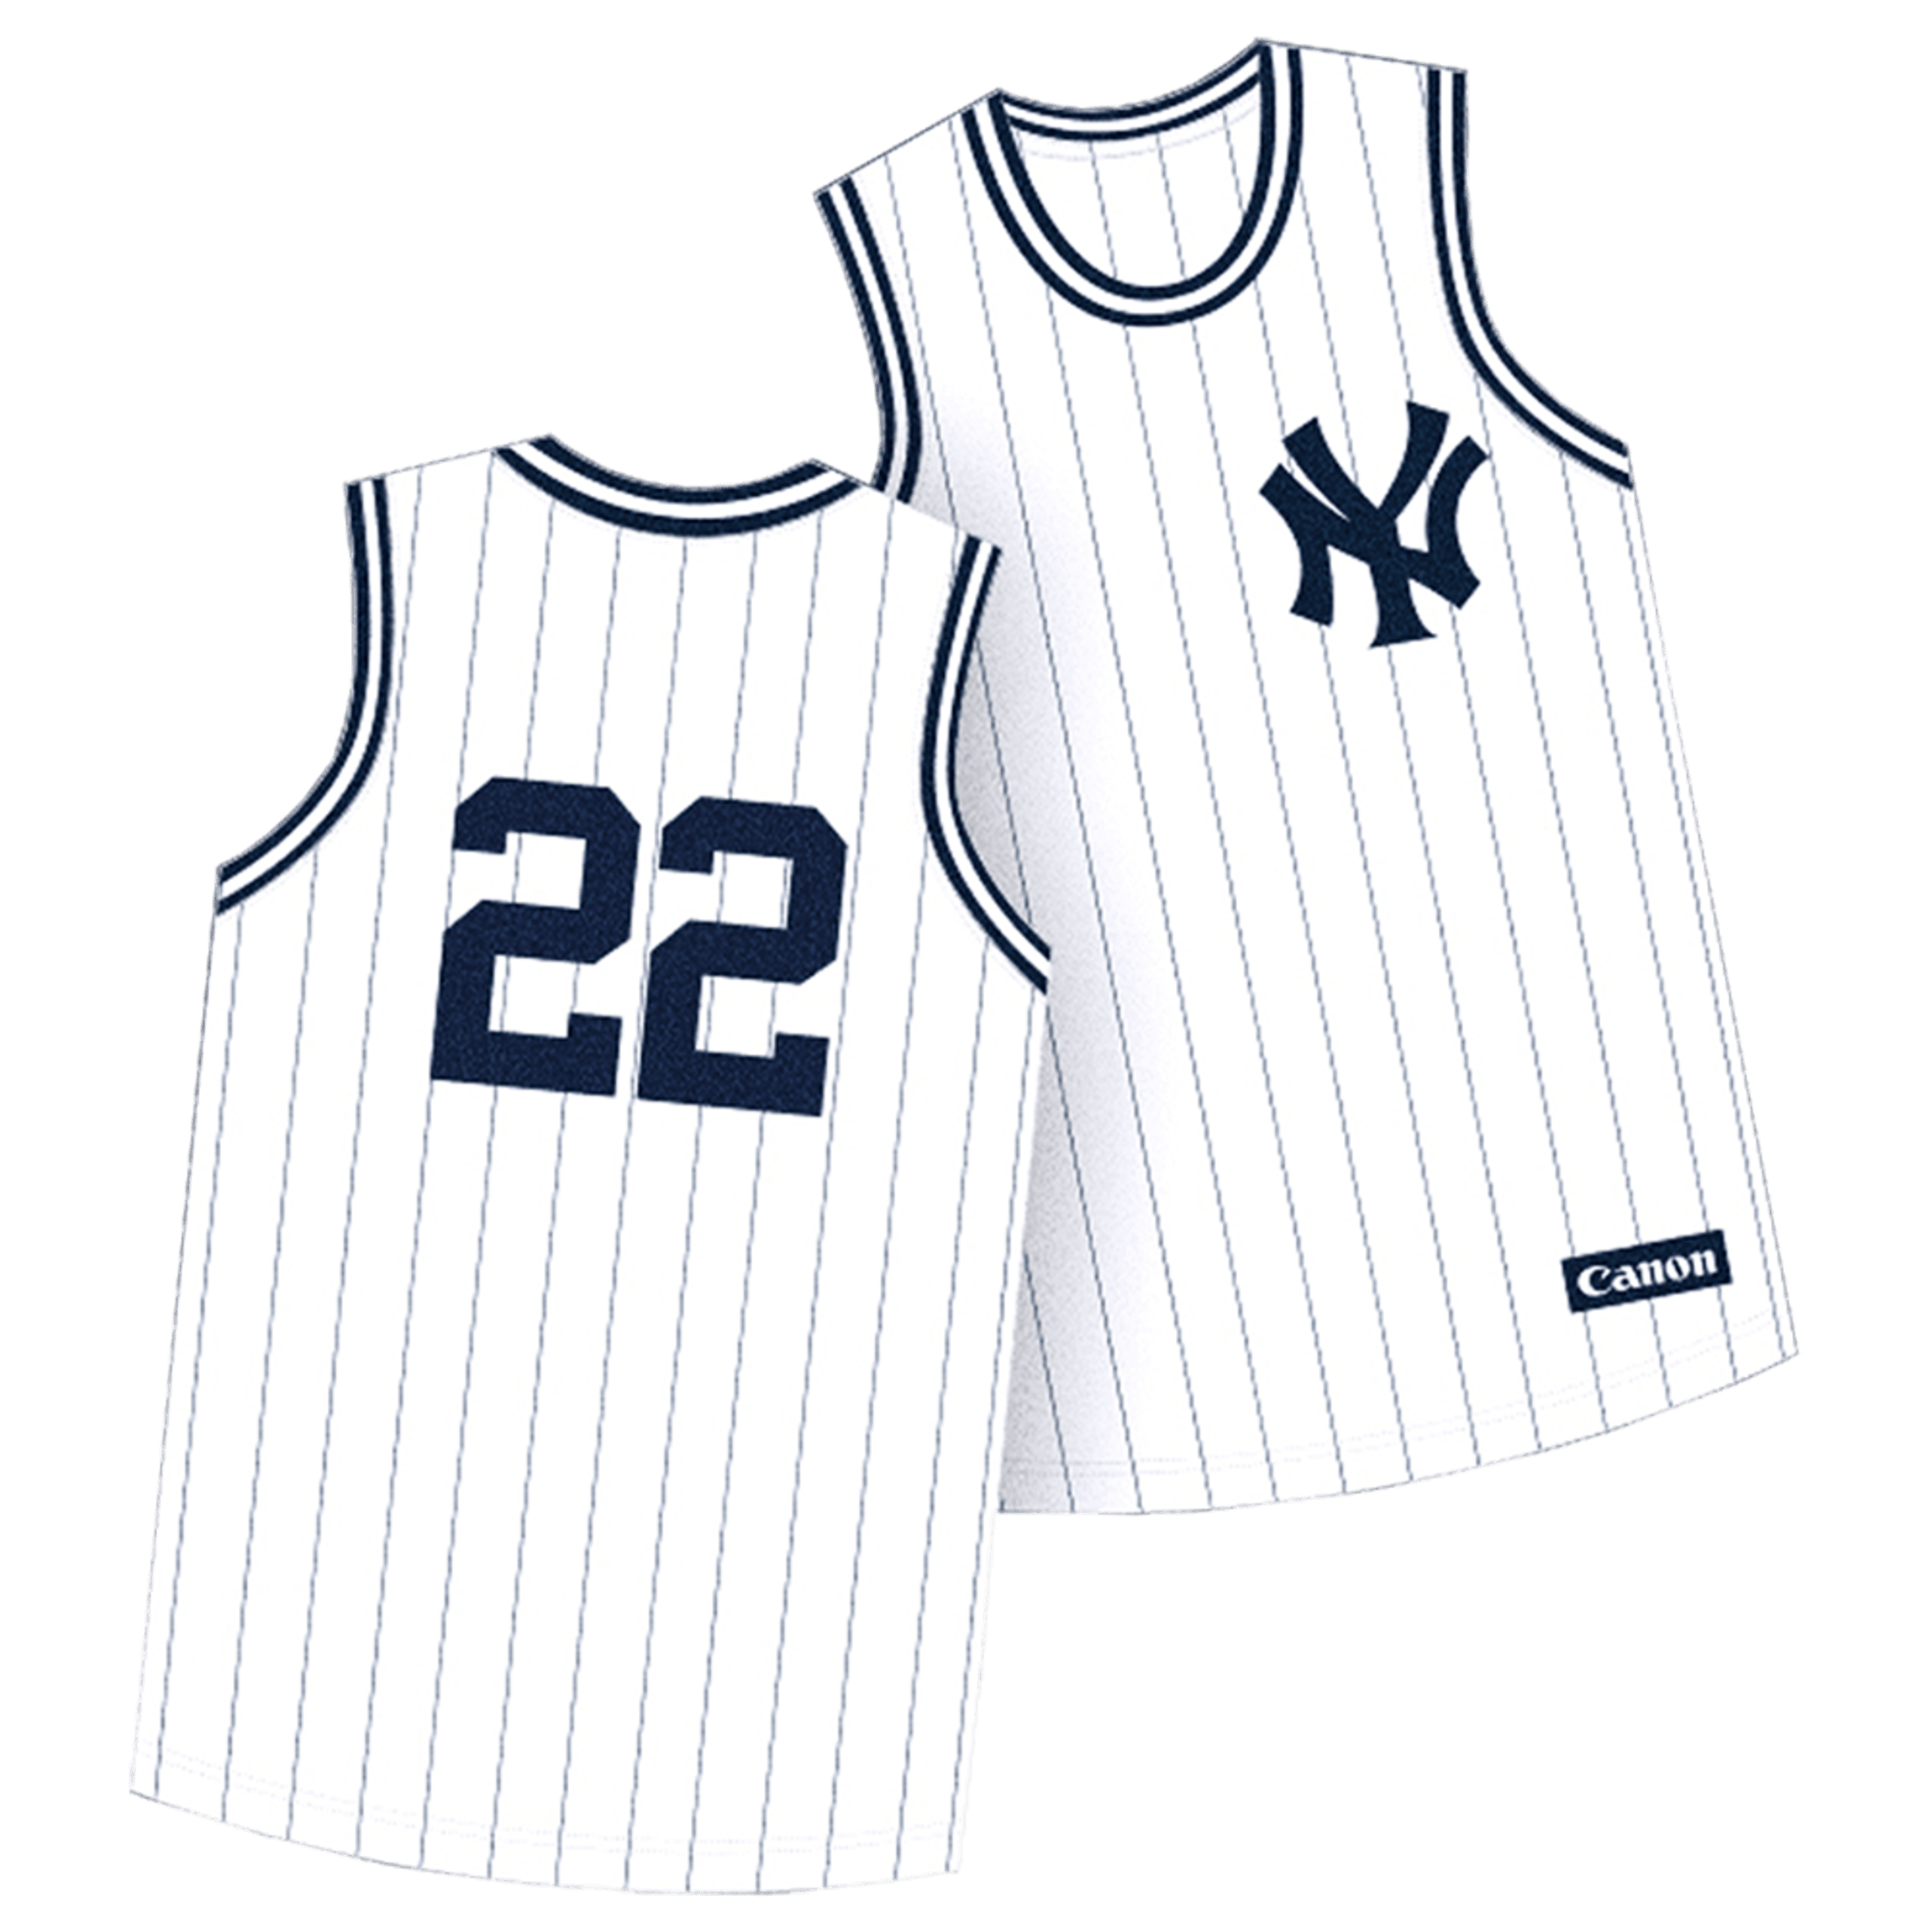 Promotional Schedule New York Yankees